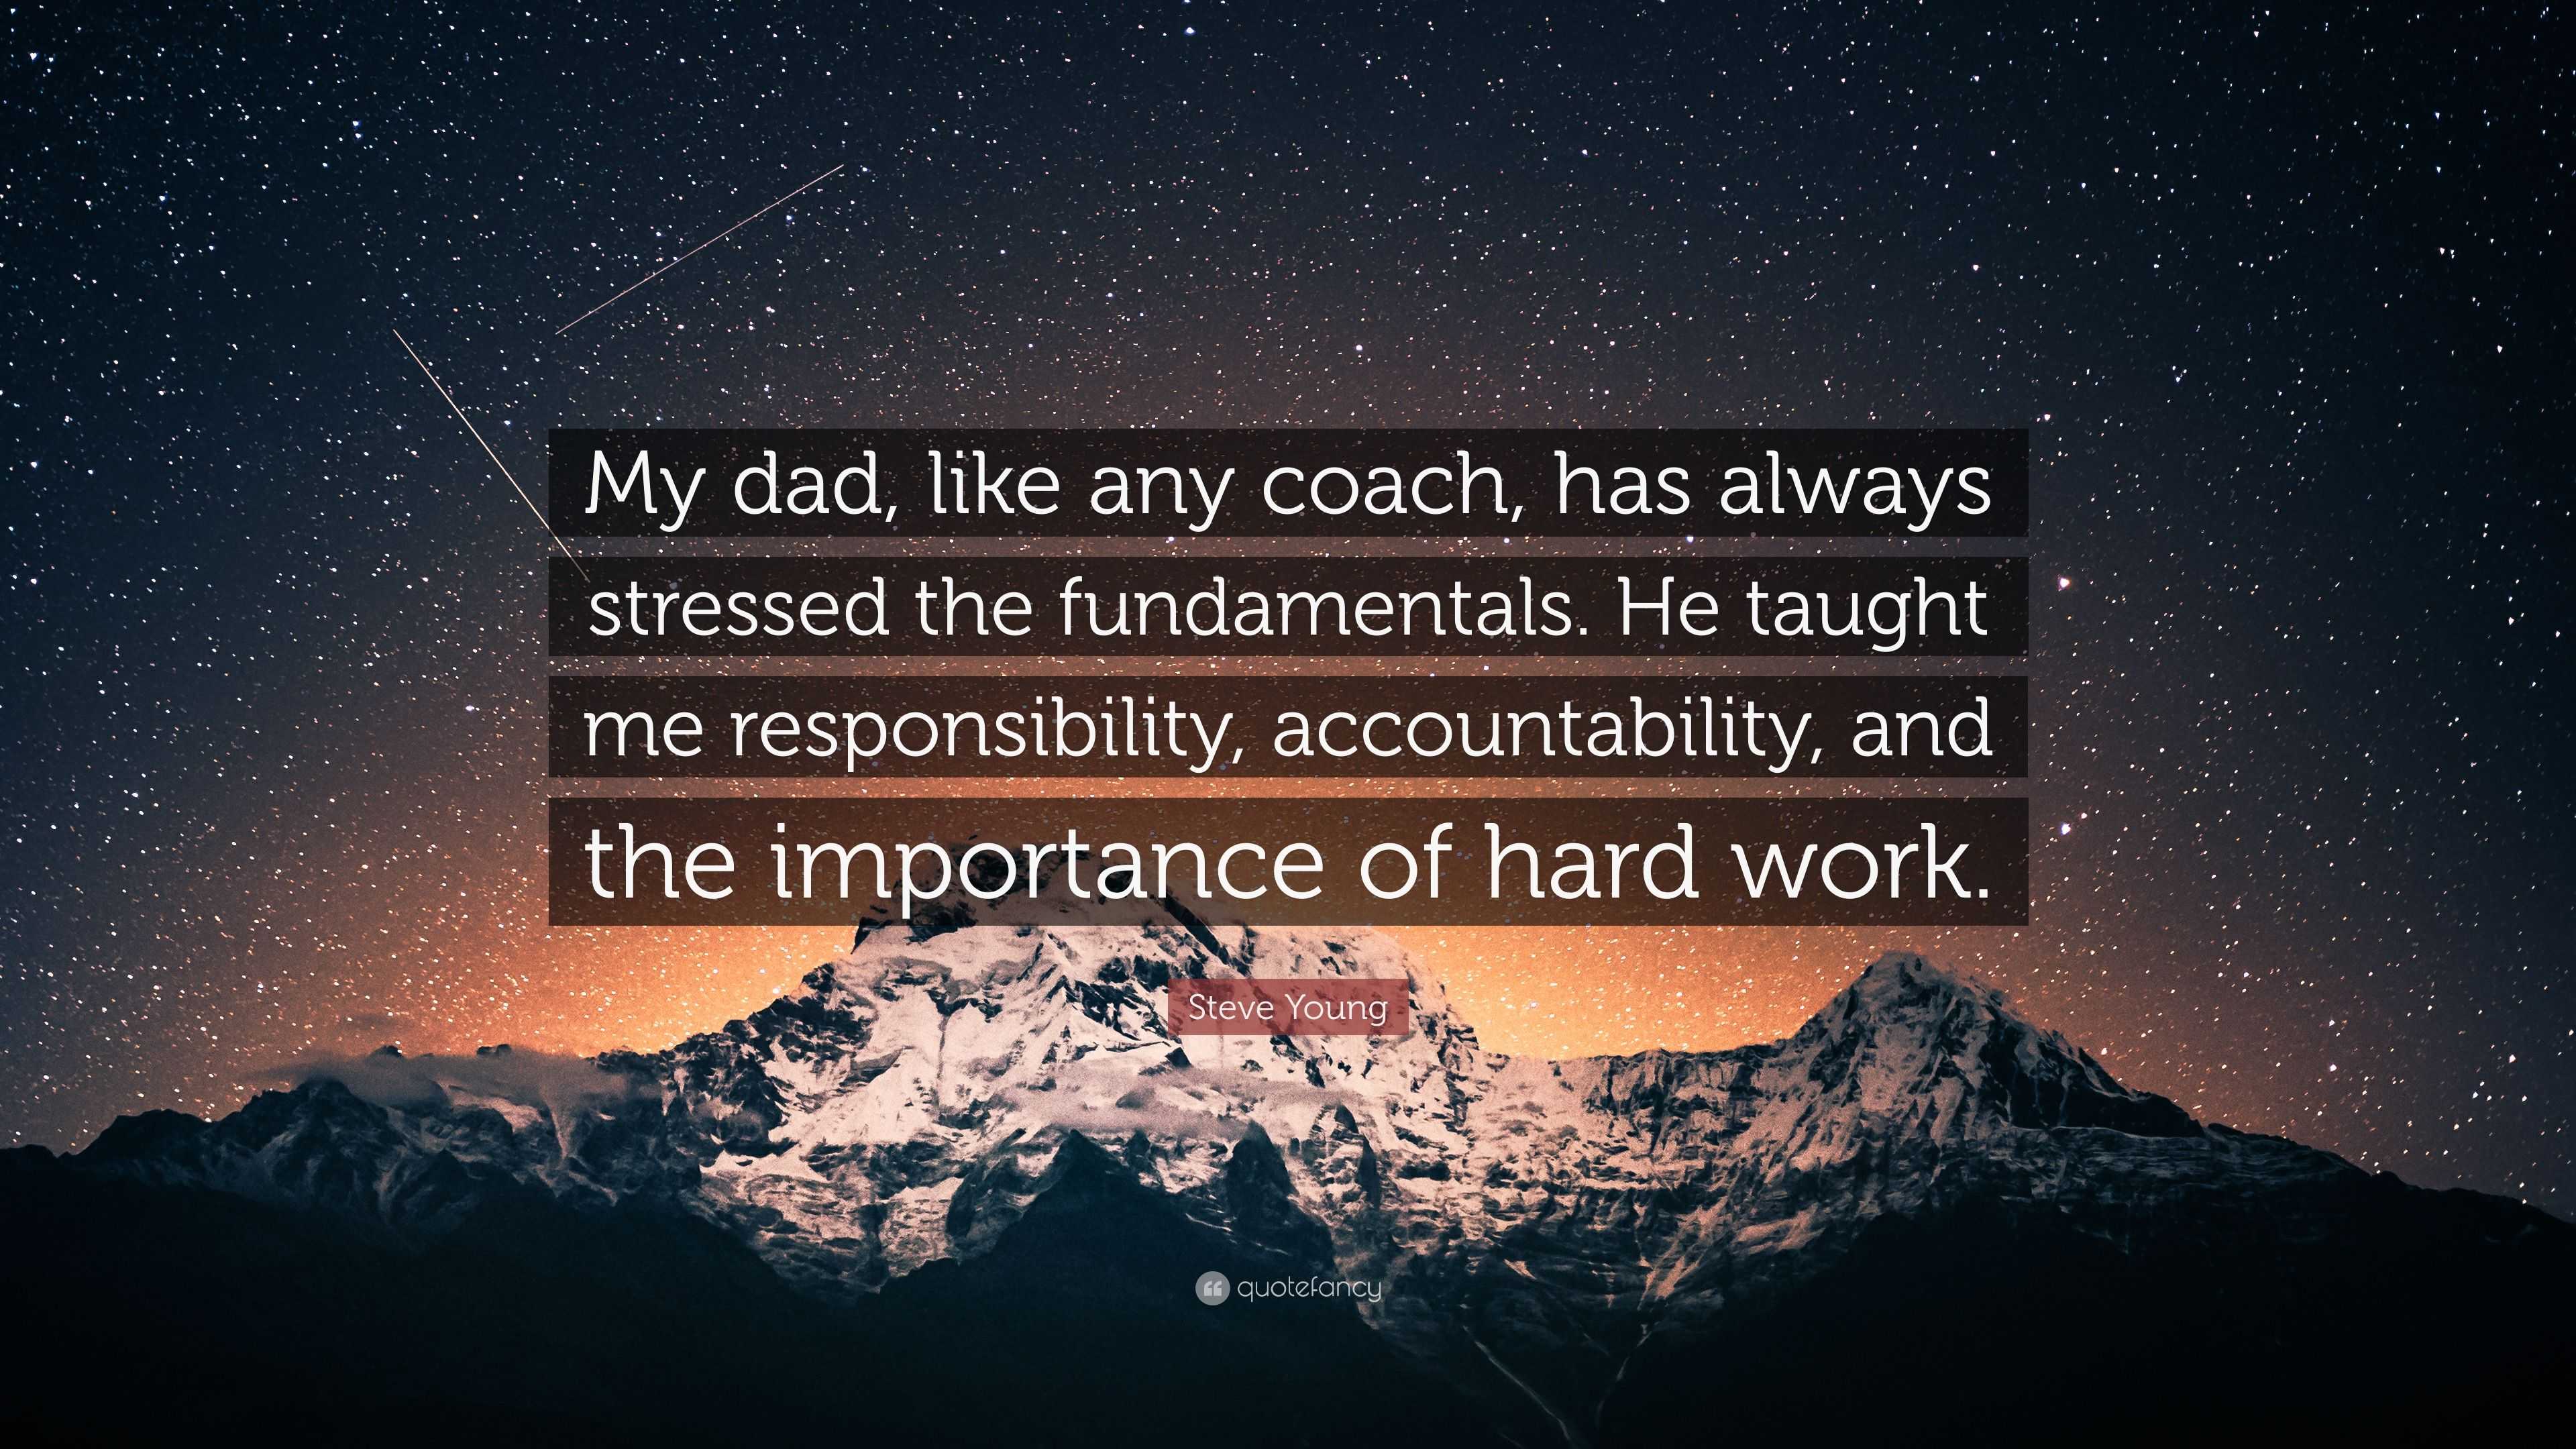 Steve Young Quote: “My dad, like any coach, has always stressed the  fundamentals. He taught me responsibility, accountability, and the impor...”